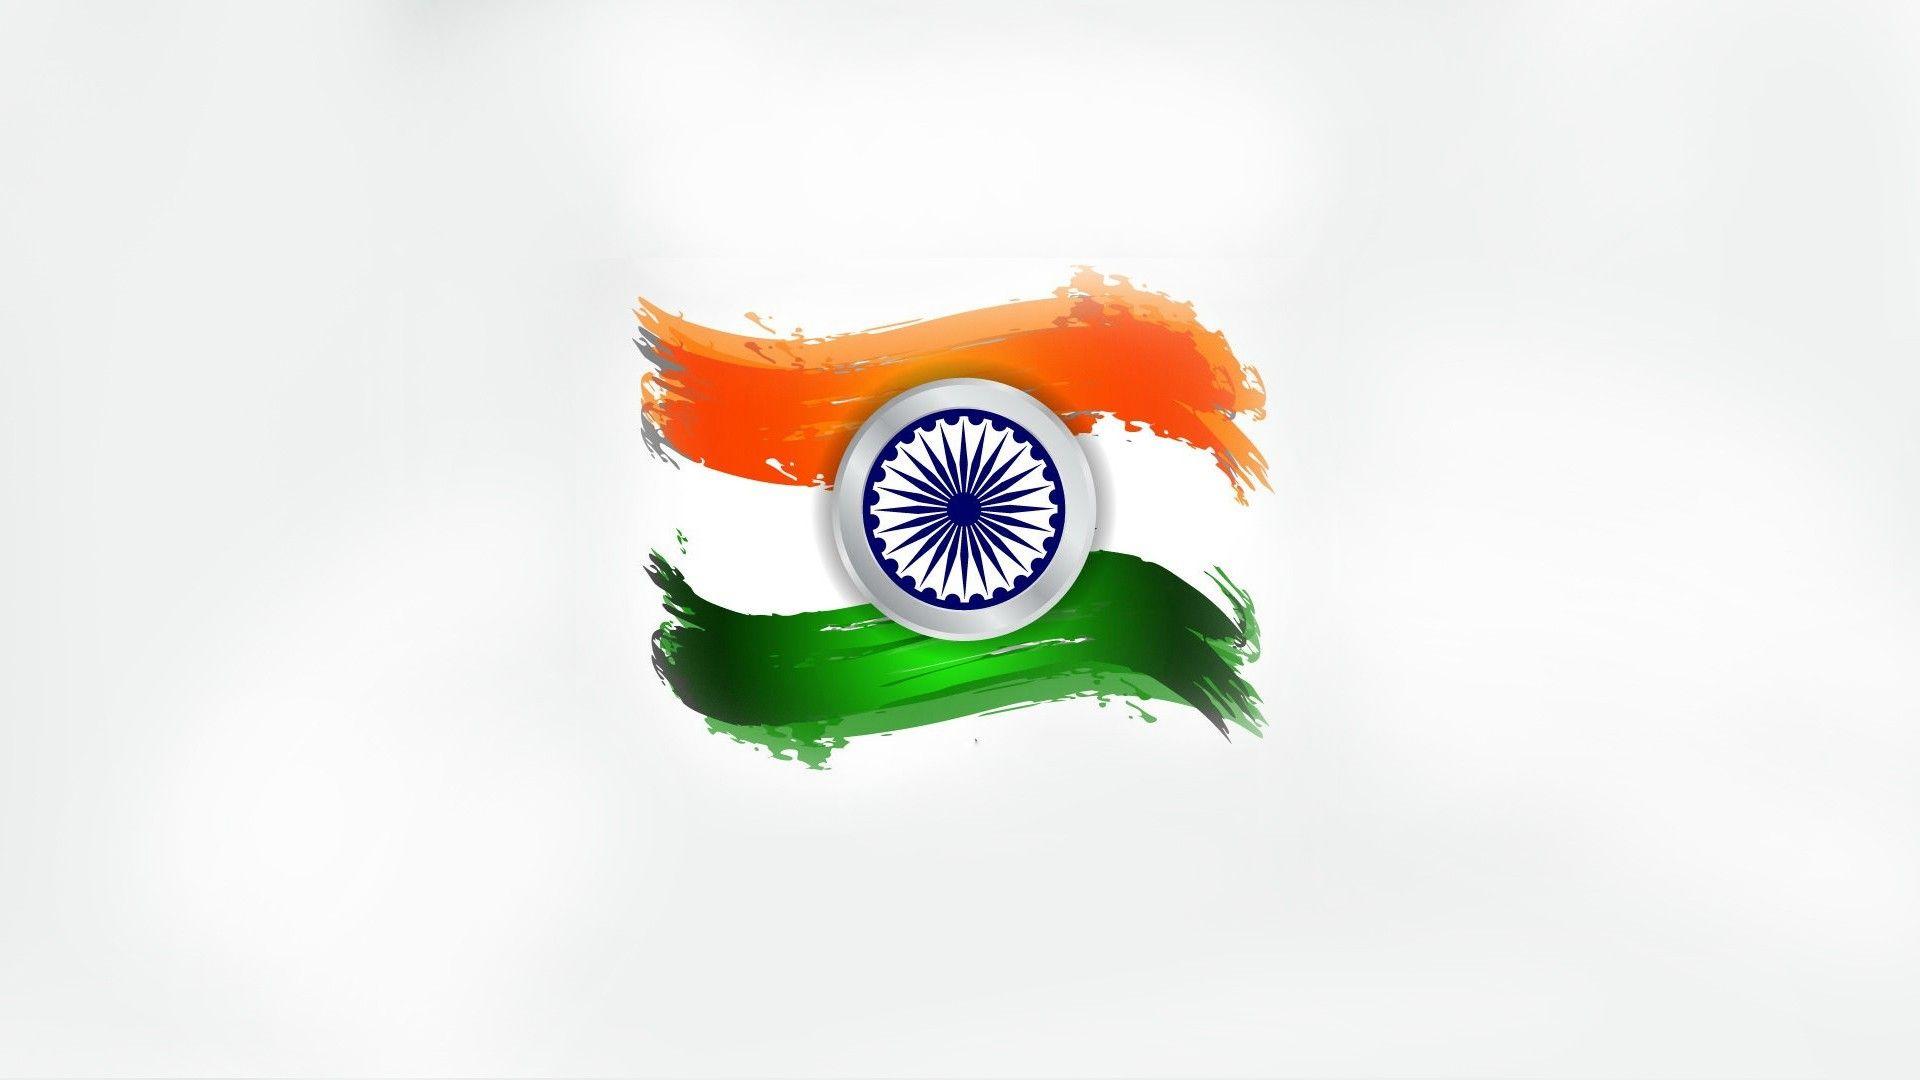 Indian Flag Image & Wallpaper That Makes Every Indian Proud